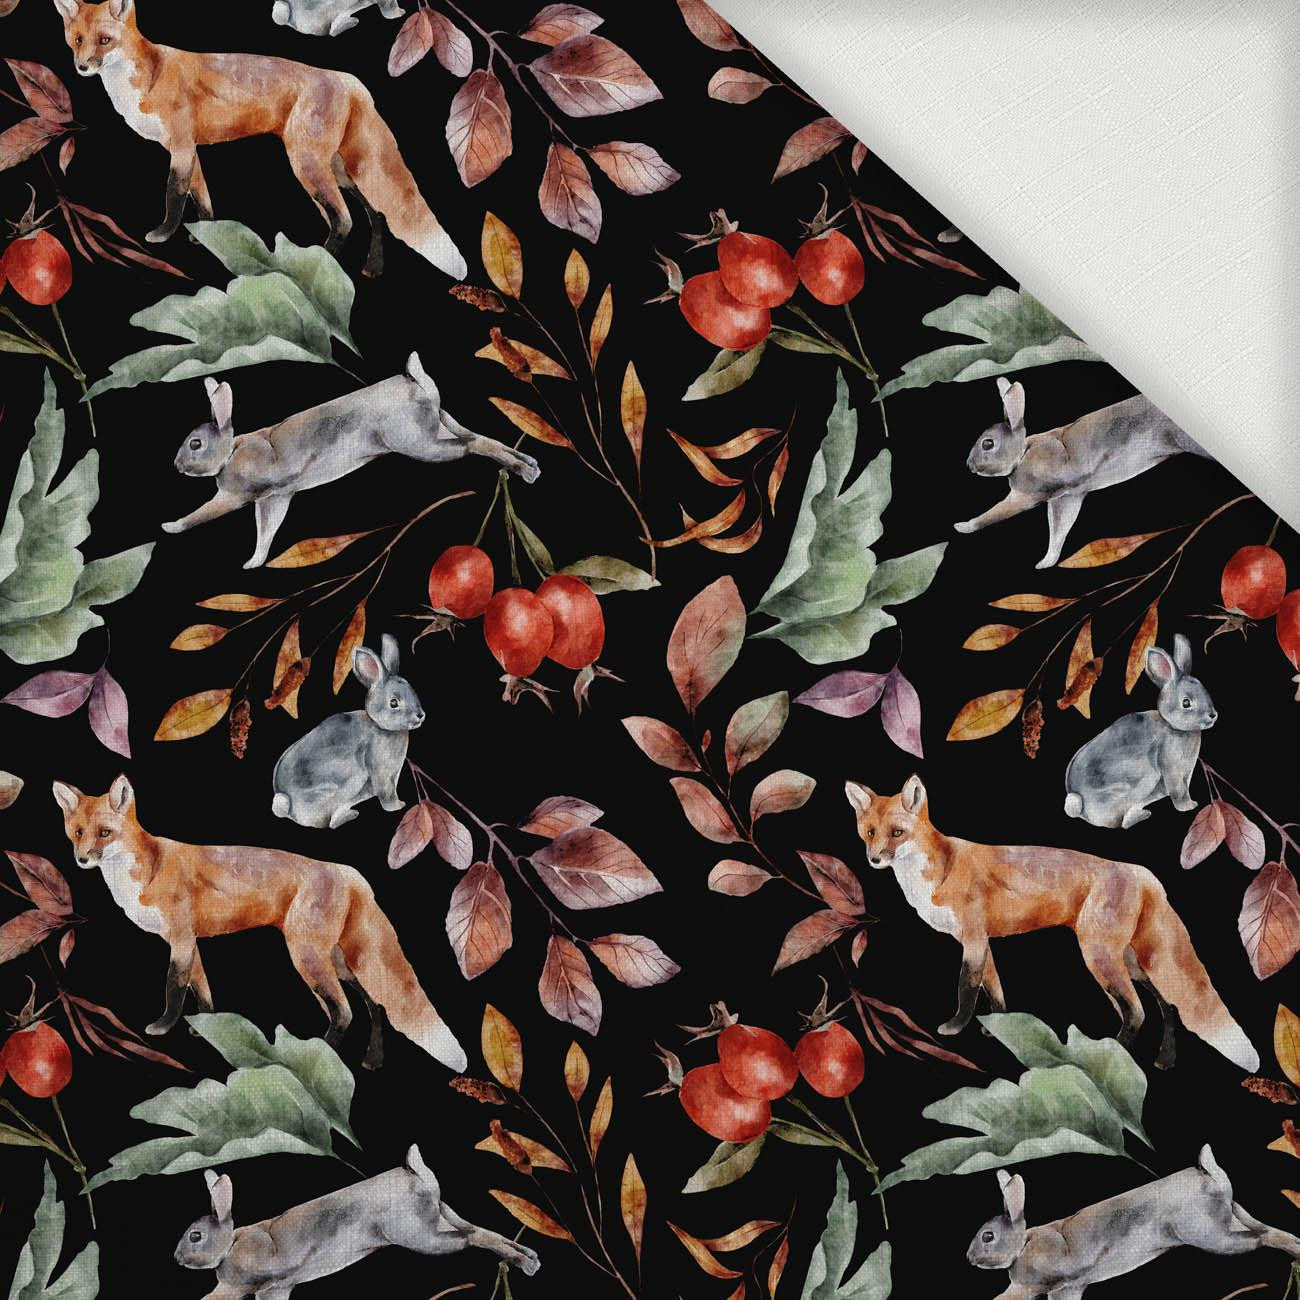 FOREST ANIMALS PAT. 2 / BLACK (COLORFUL AUTUMN) - Woven Fabric for tablecloths